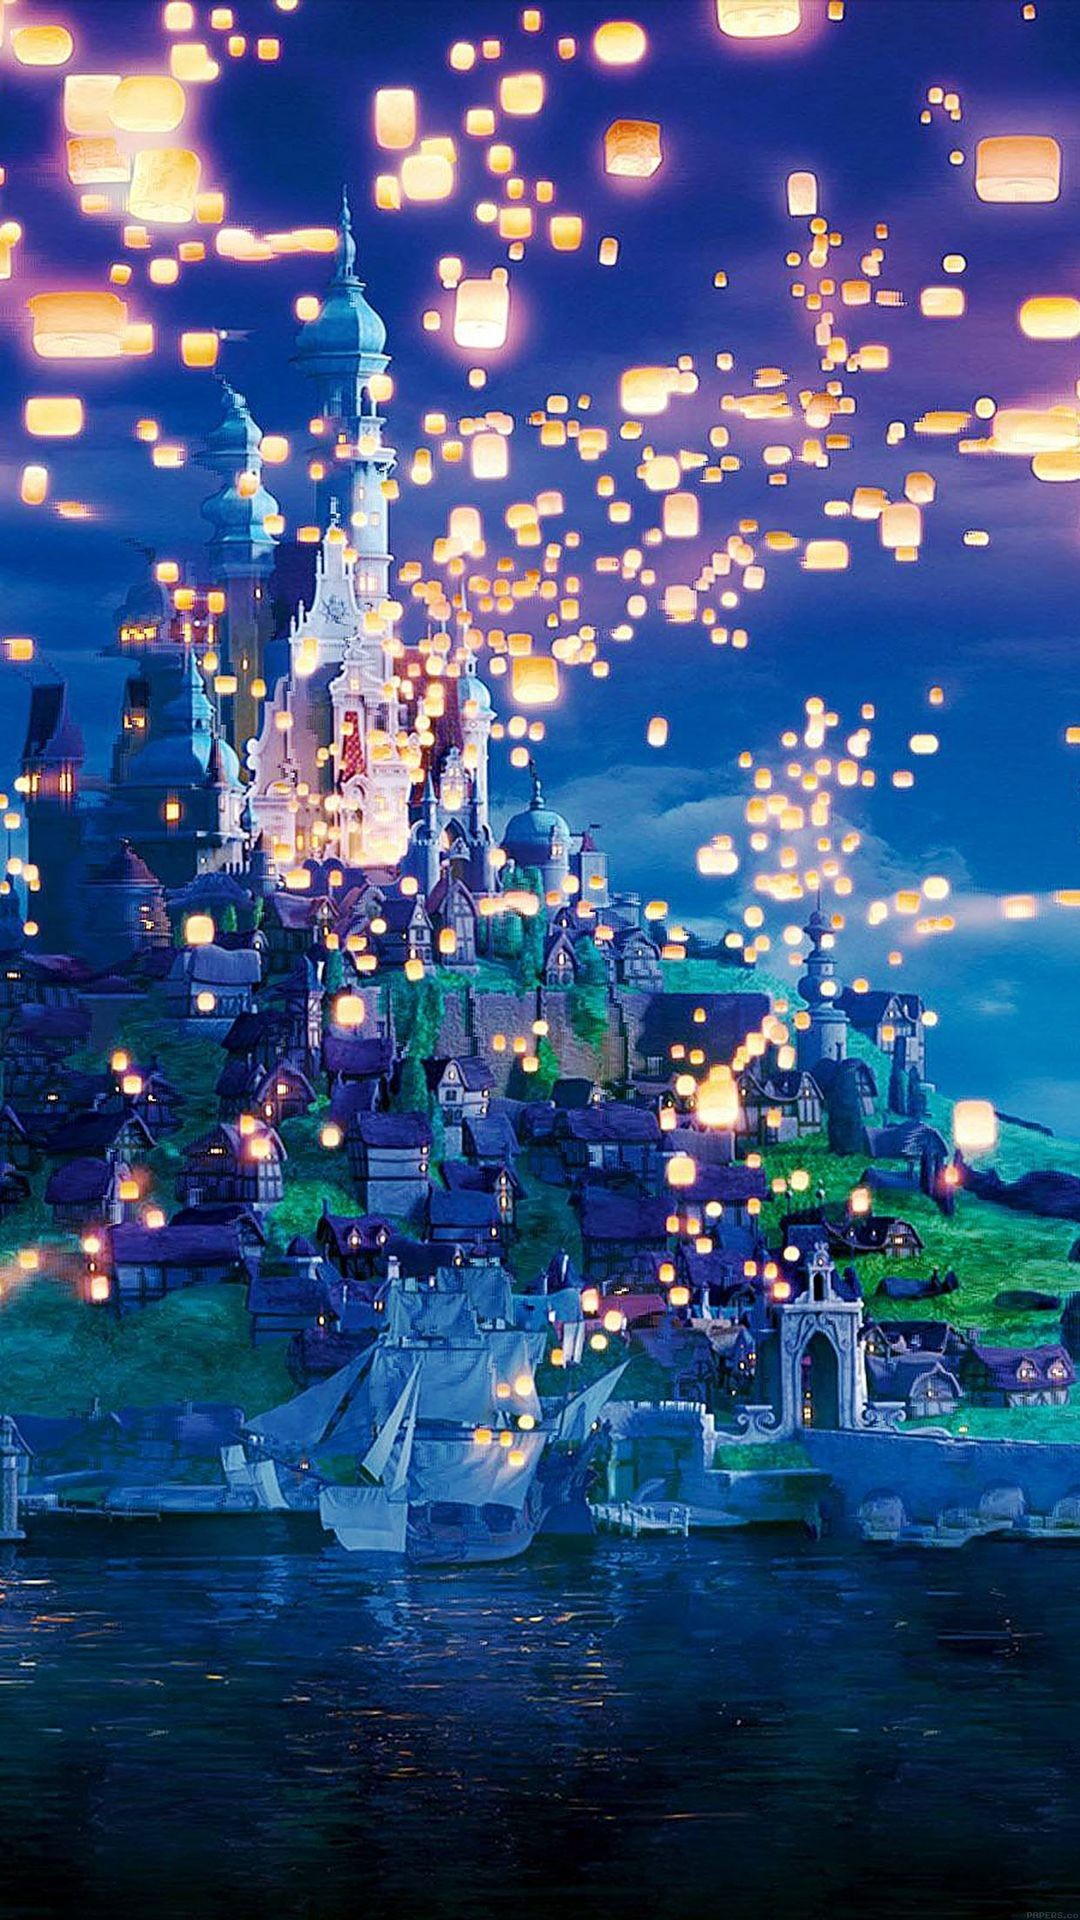 1080x1920 ...  Tap image for more iPhone Disney wallpapers! Rapunzel dreams